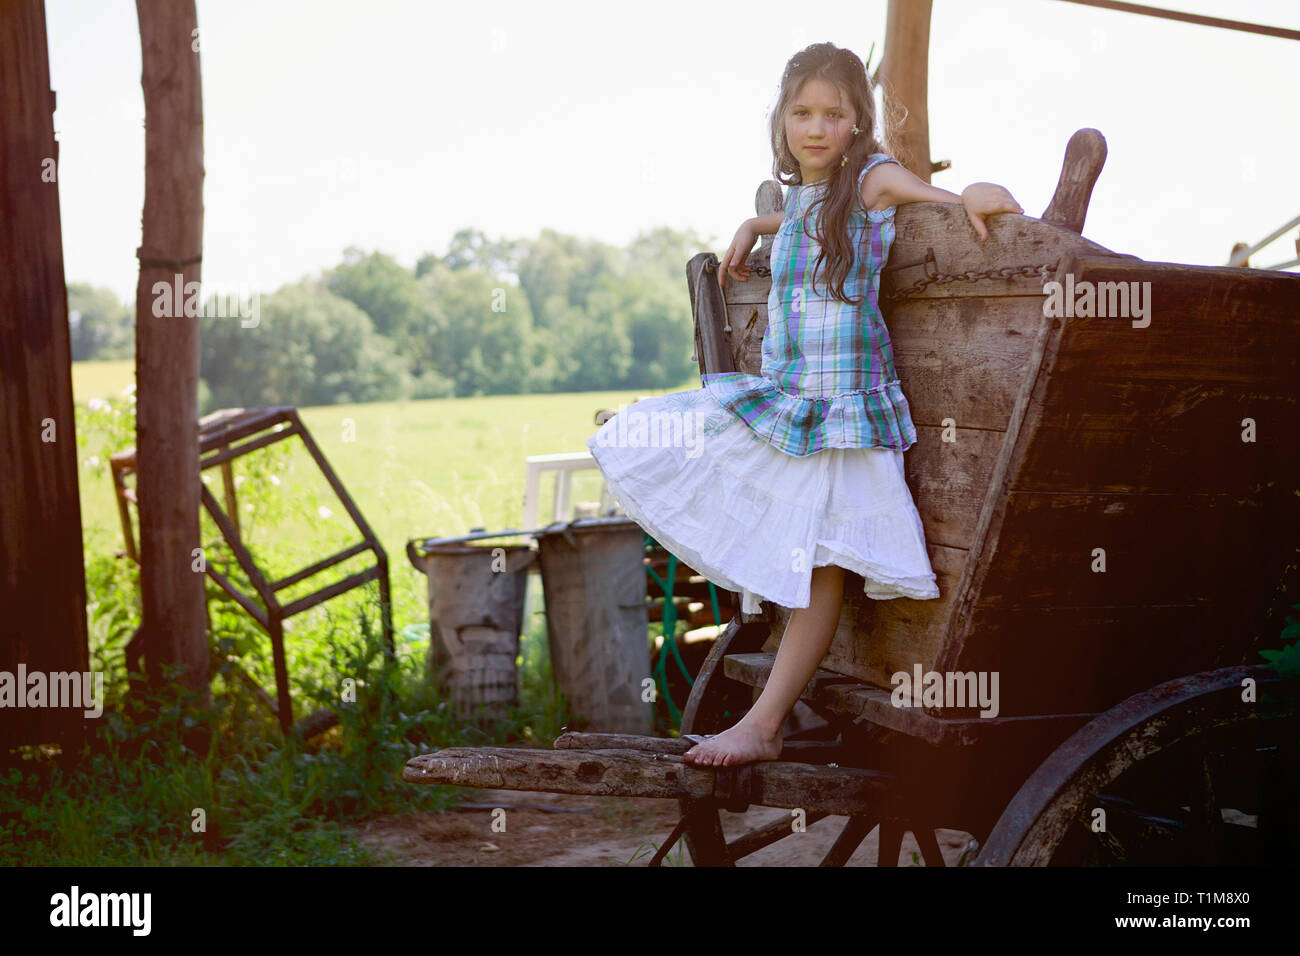 Portrait barefoot girl in dress leaning on rural wagon Stock Photo